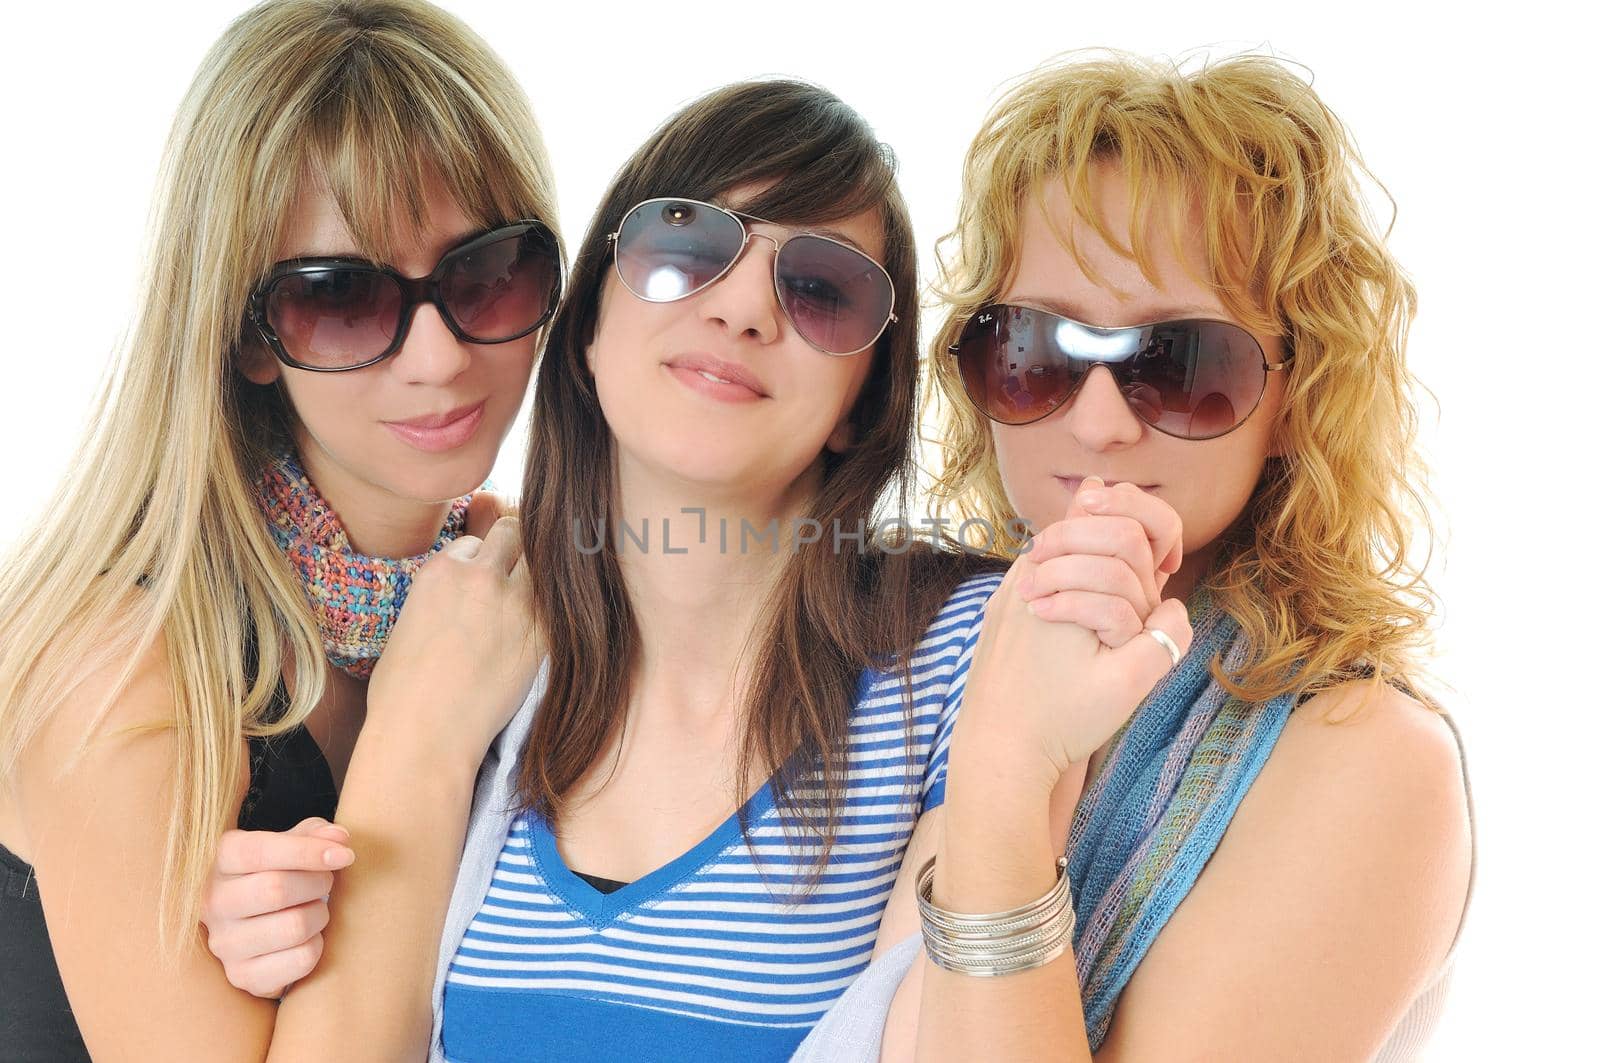 three woman isolated together smile